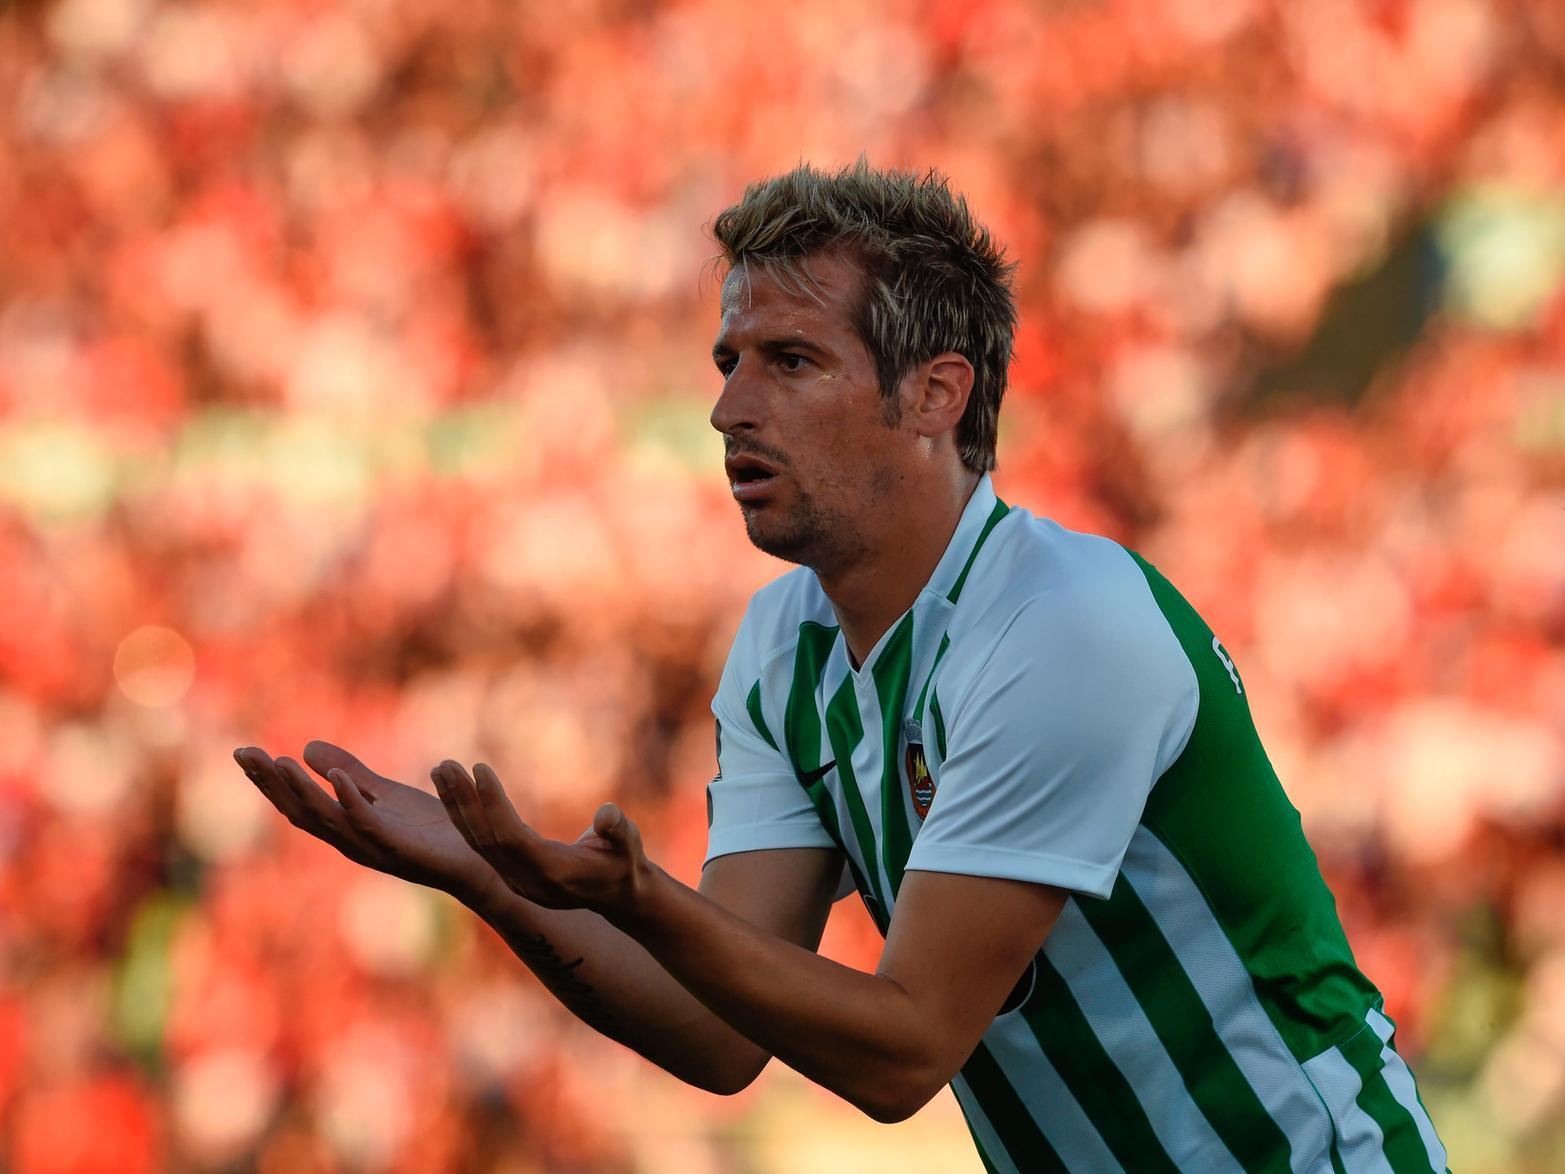 A familiar face but not for Birmingham City. Former Real Madrid and Portugal international Coentrao is the starting left-wing-back at the fruitful age of 34.